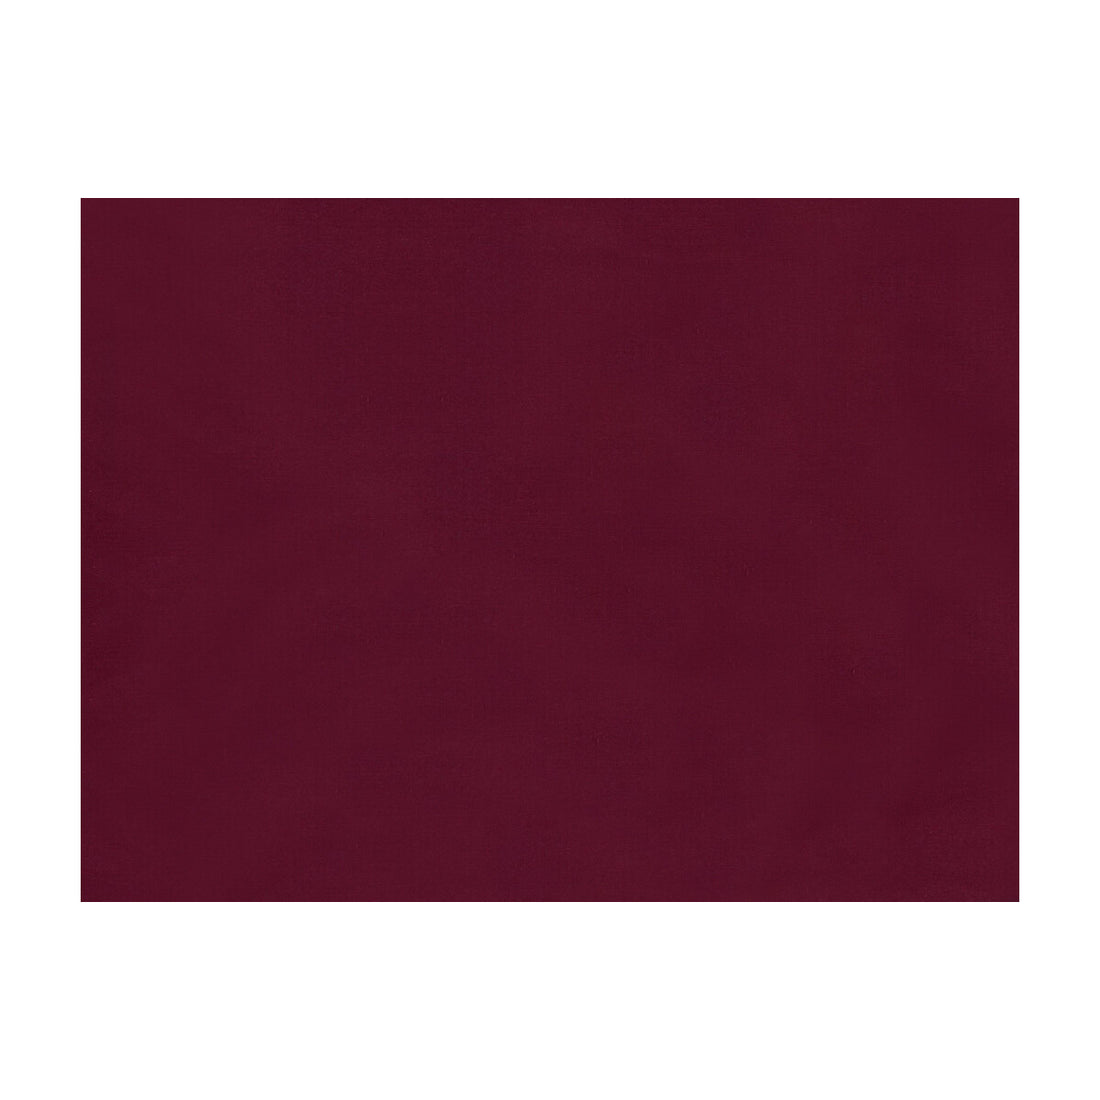 Sukhothai fabric in roan rouge color - pattern JAG-50002.2.0 - by Brunschwig &amp; Fils in the Jagtar collection